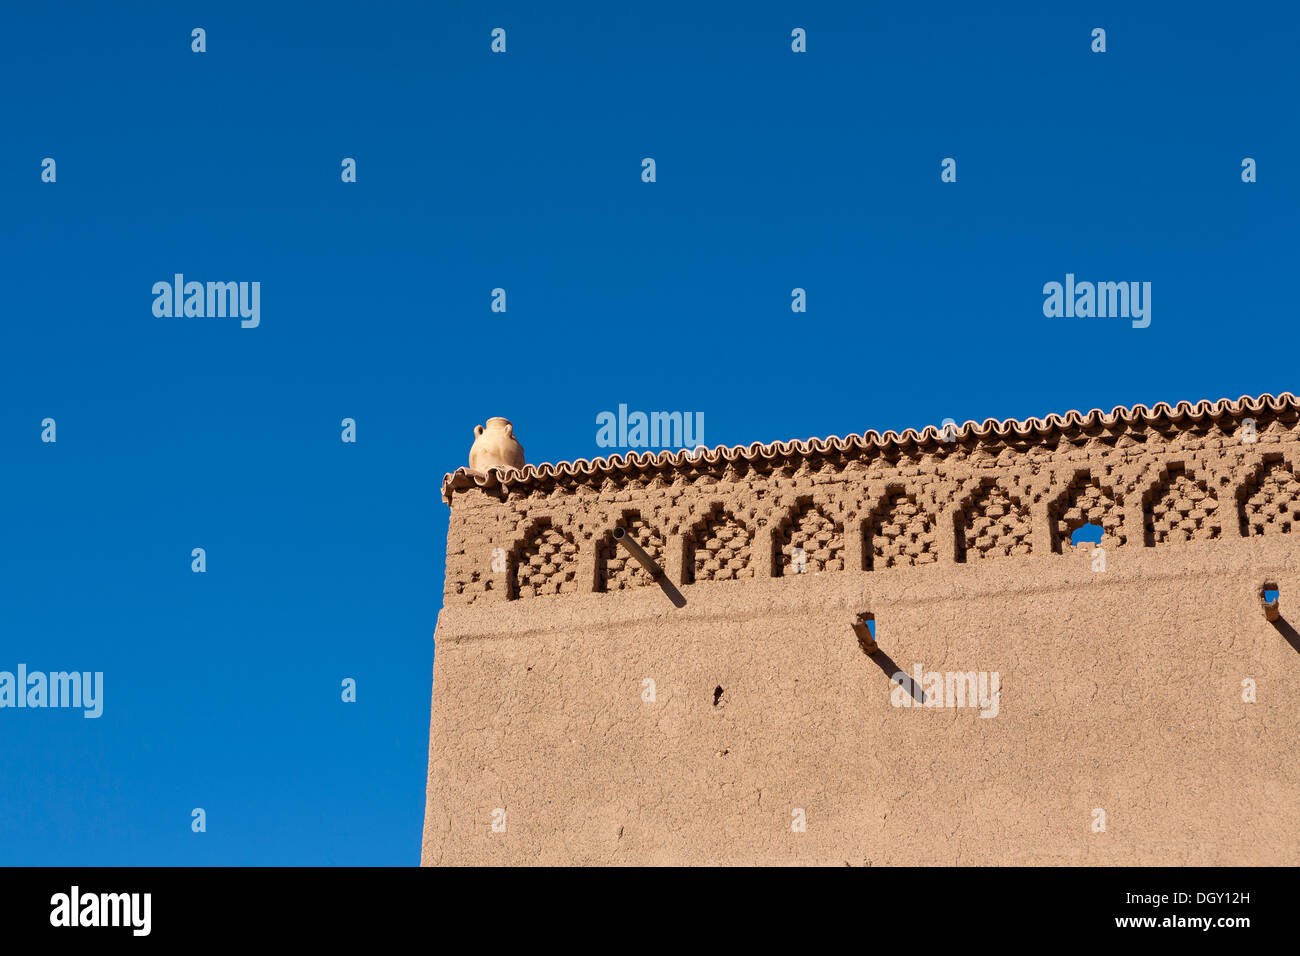 Detail of corner of traditional building in the Draa Valley, Southern Morocco, North Africa Stock Photo